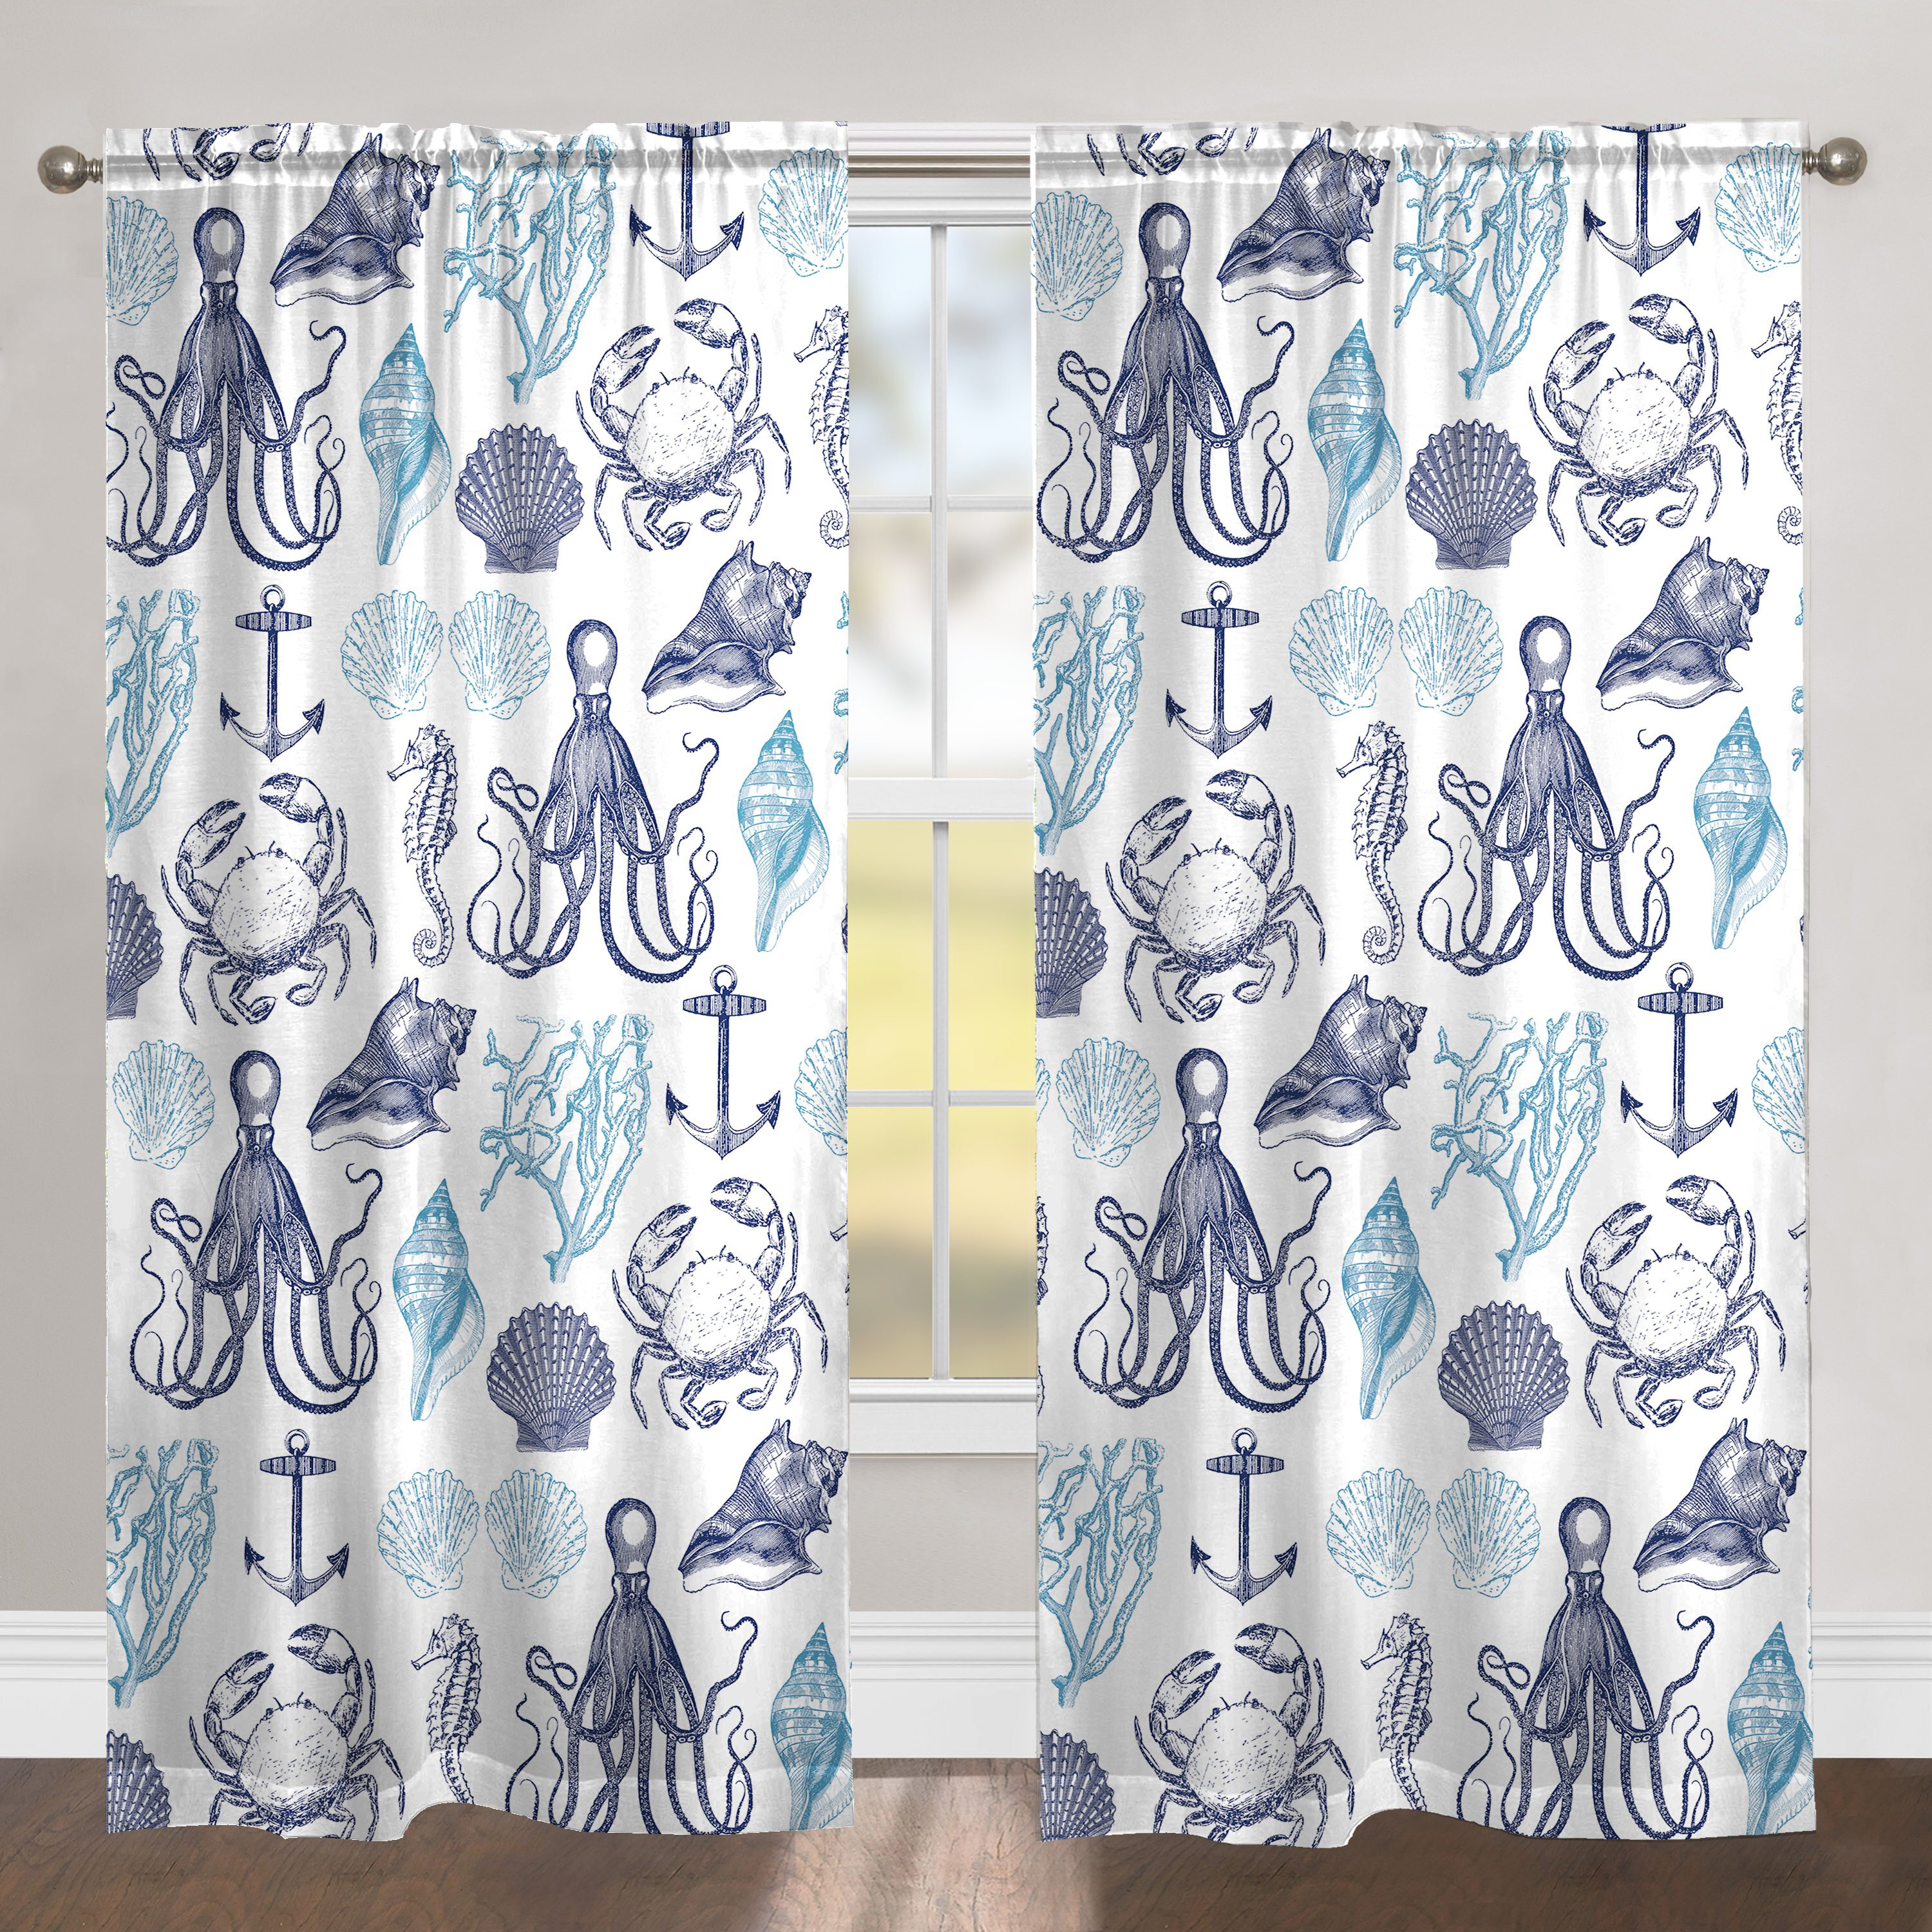 Coastal Window Curtains / Amazon Com Navy And White Curtains For Living Room Set 2 Panels Rod Pocket Window Ombre Coastal Sheer Curtains For Bedroom Masculine Man S Cave Teen Boys Room Decor Man Christmas 52 X 84 / Maybe you would like to learn more about one of these?